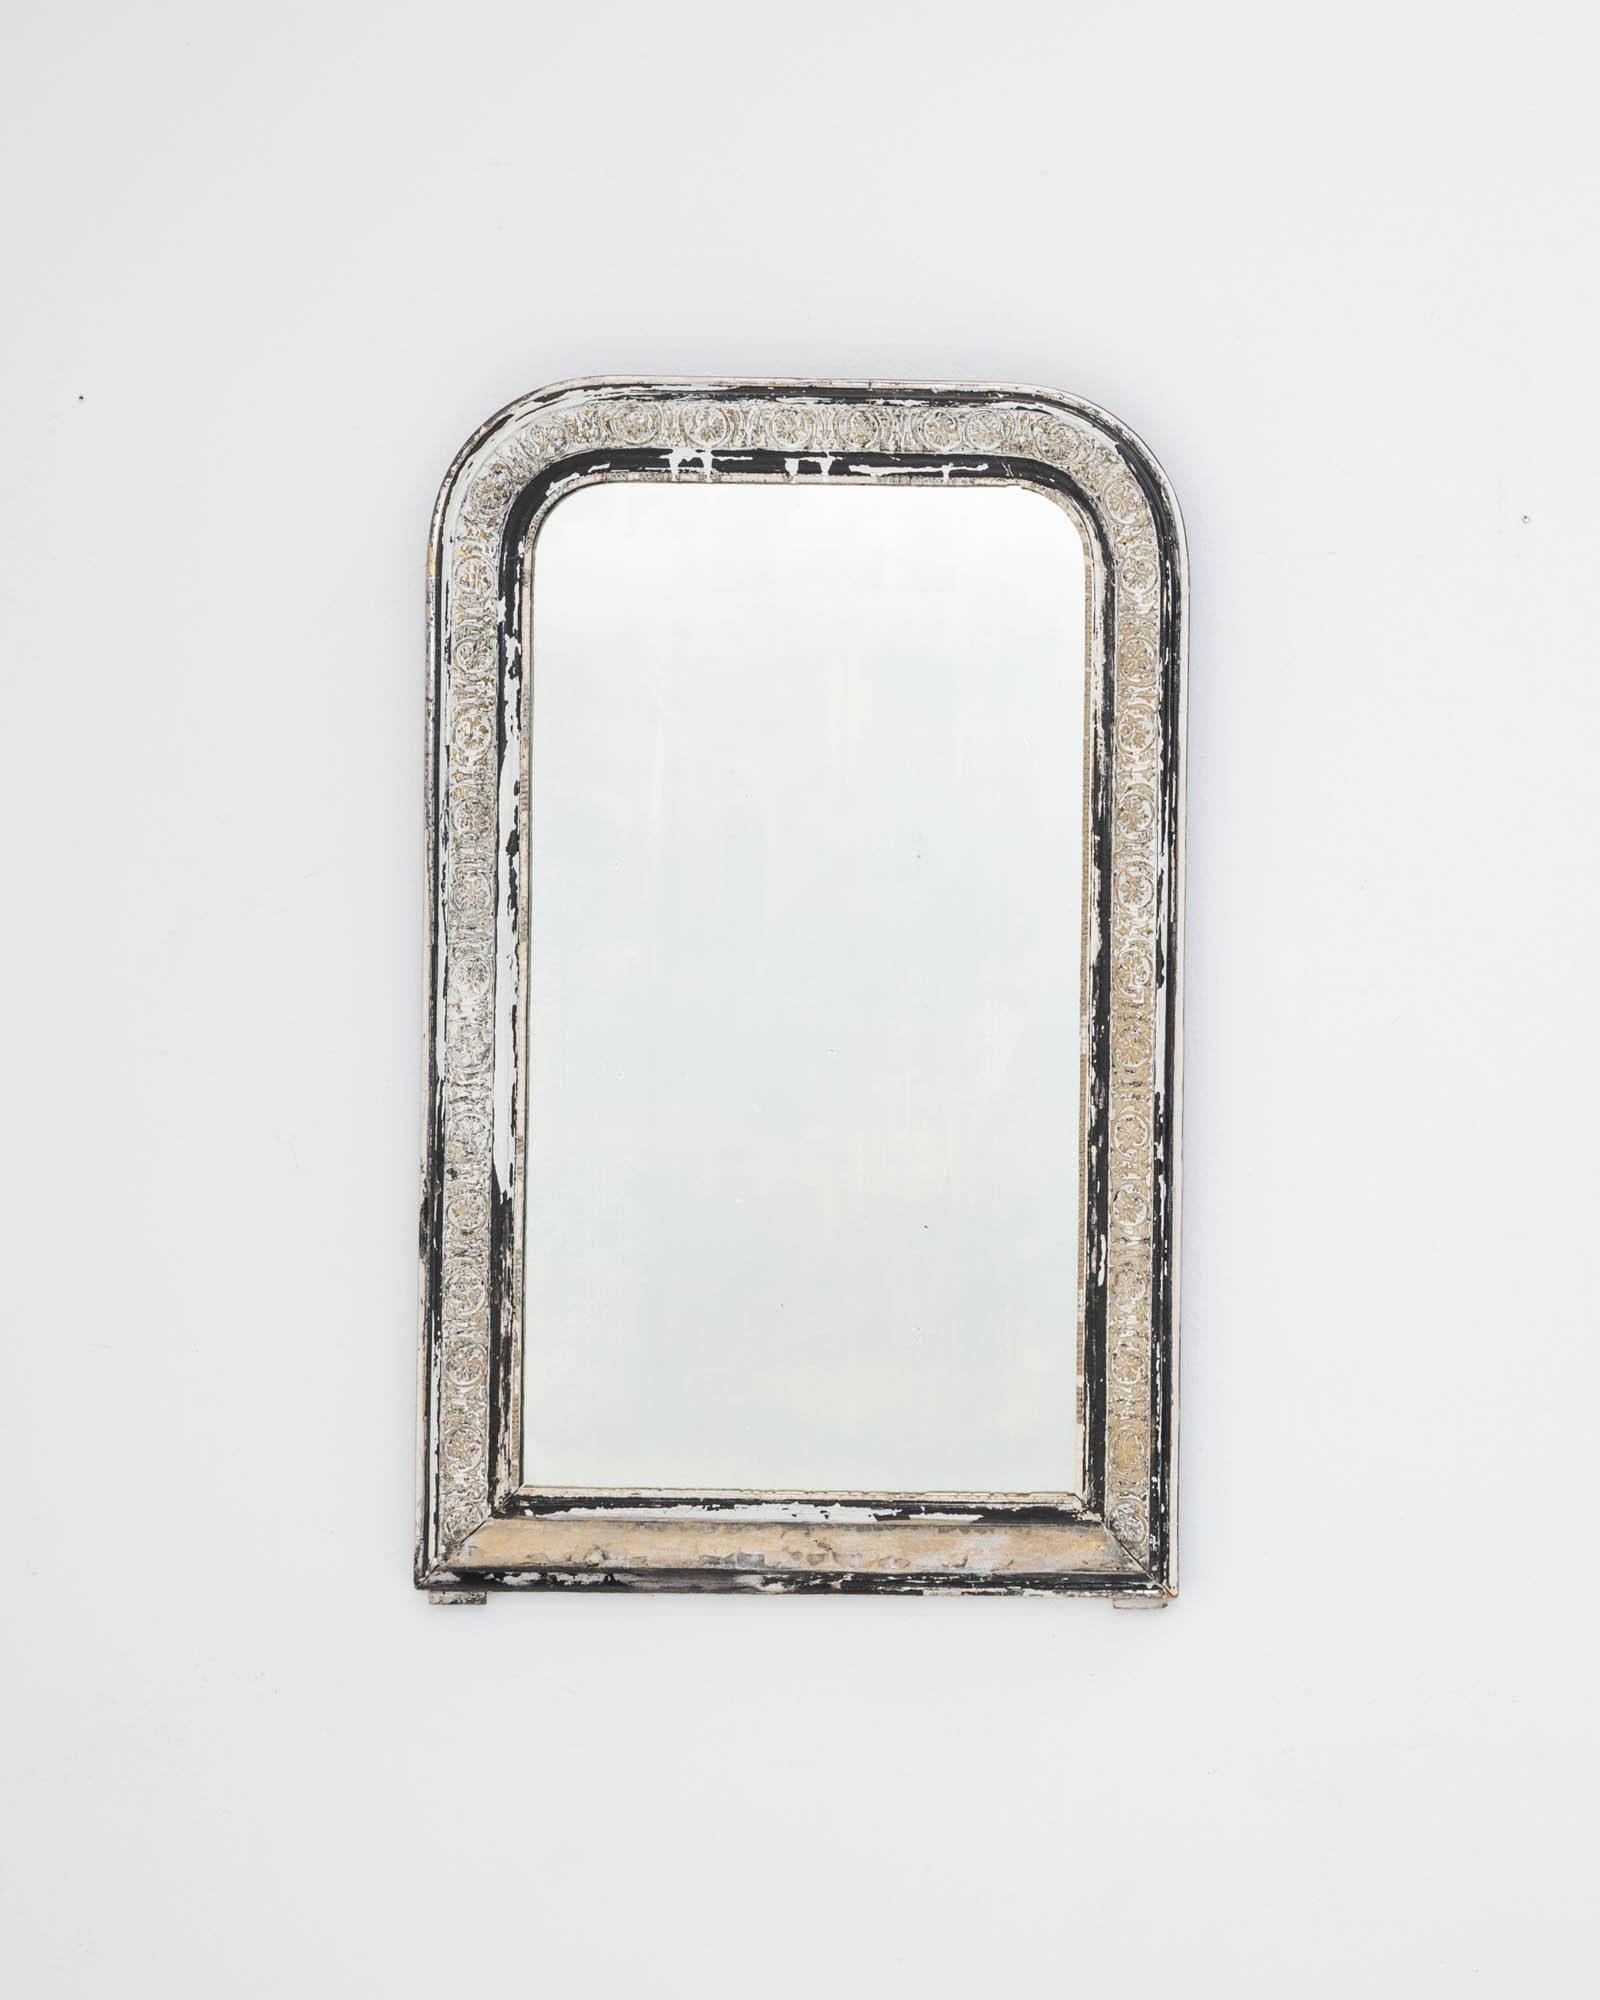 A wooden mirror created in 19th century France. Proudly aged, the off-white paint has worn to a gentle patina, unveiling auburn and amber hues that shine a noble contrast on the arched frame. This one of a kind mirror combines traditional design